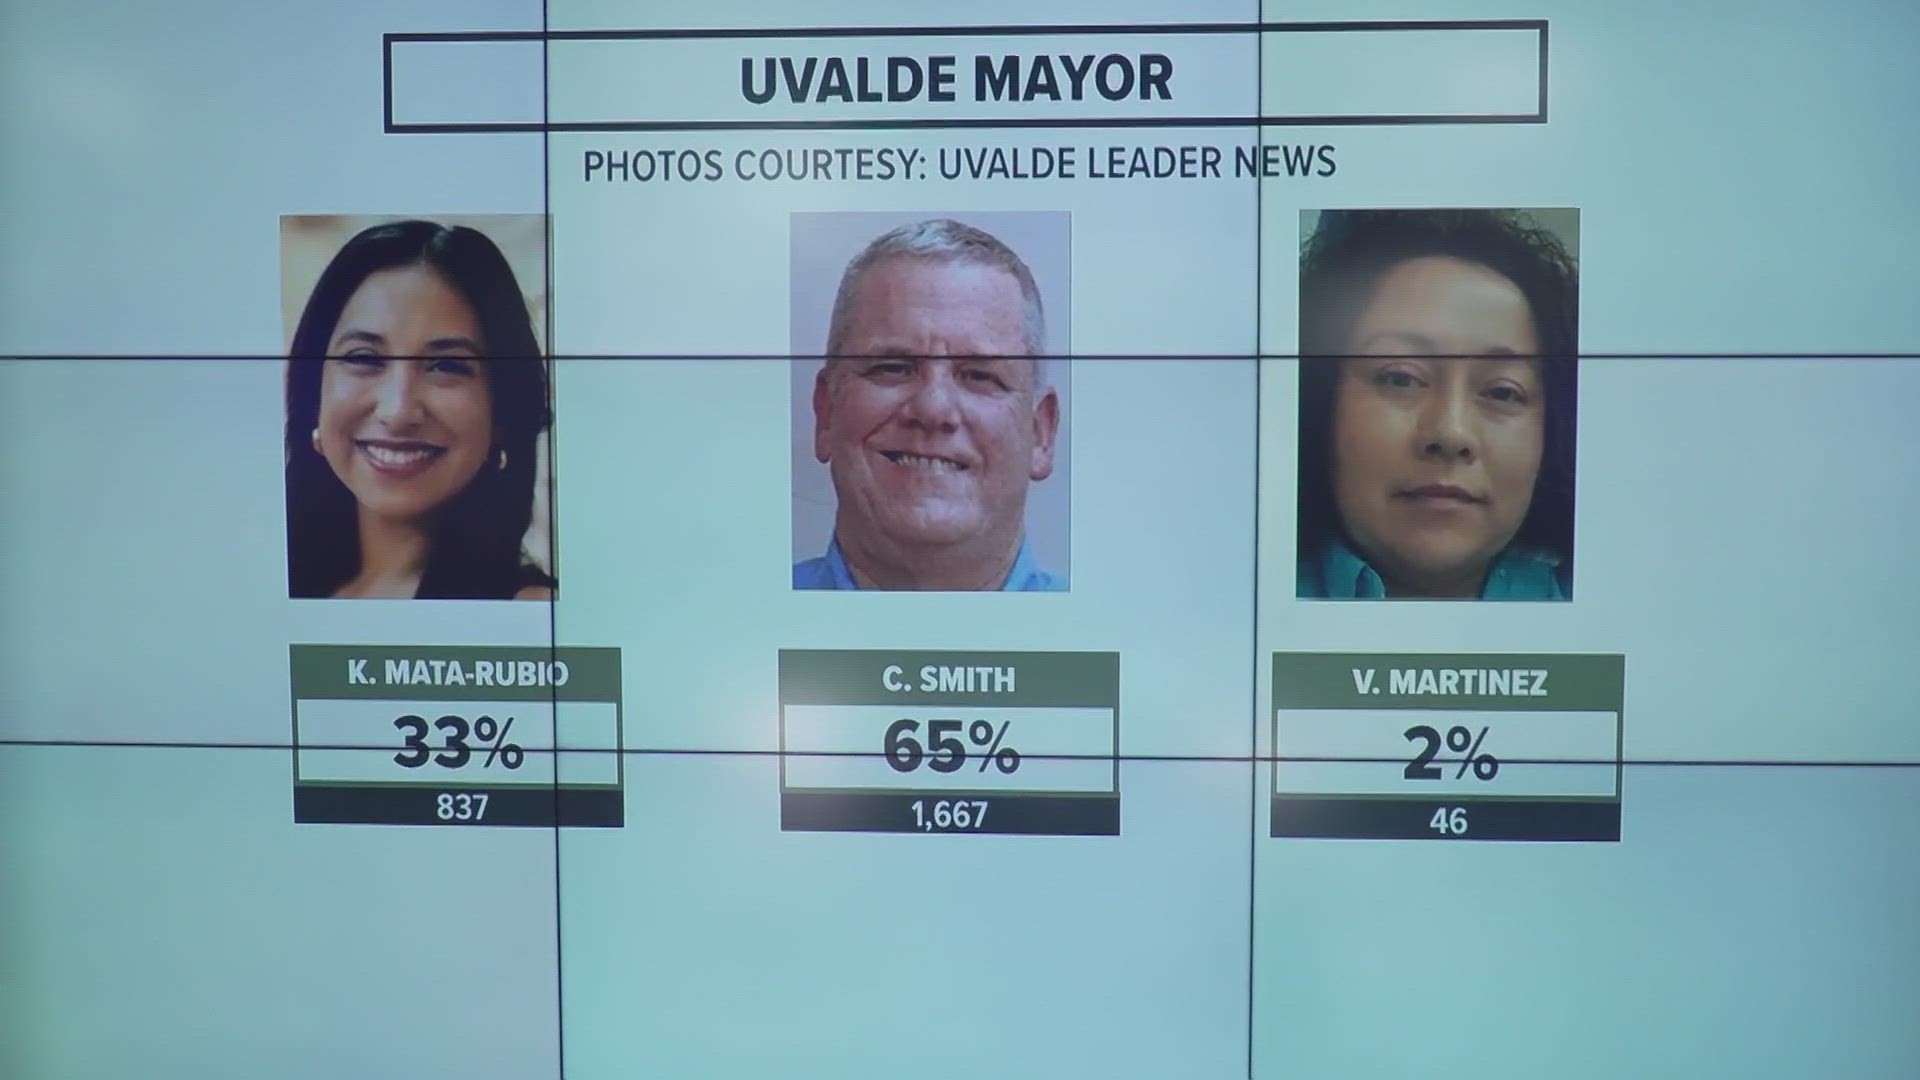 Cody Smith will be the new mayor of Uvalde after winning 65 percent of the vote